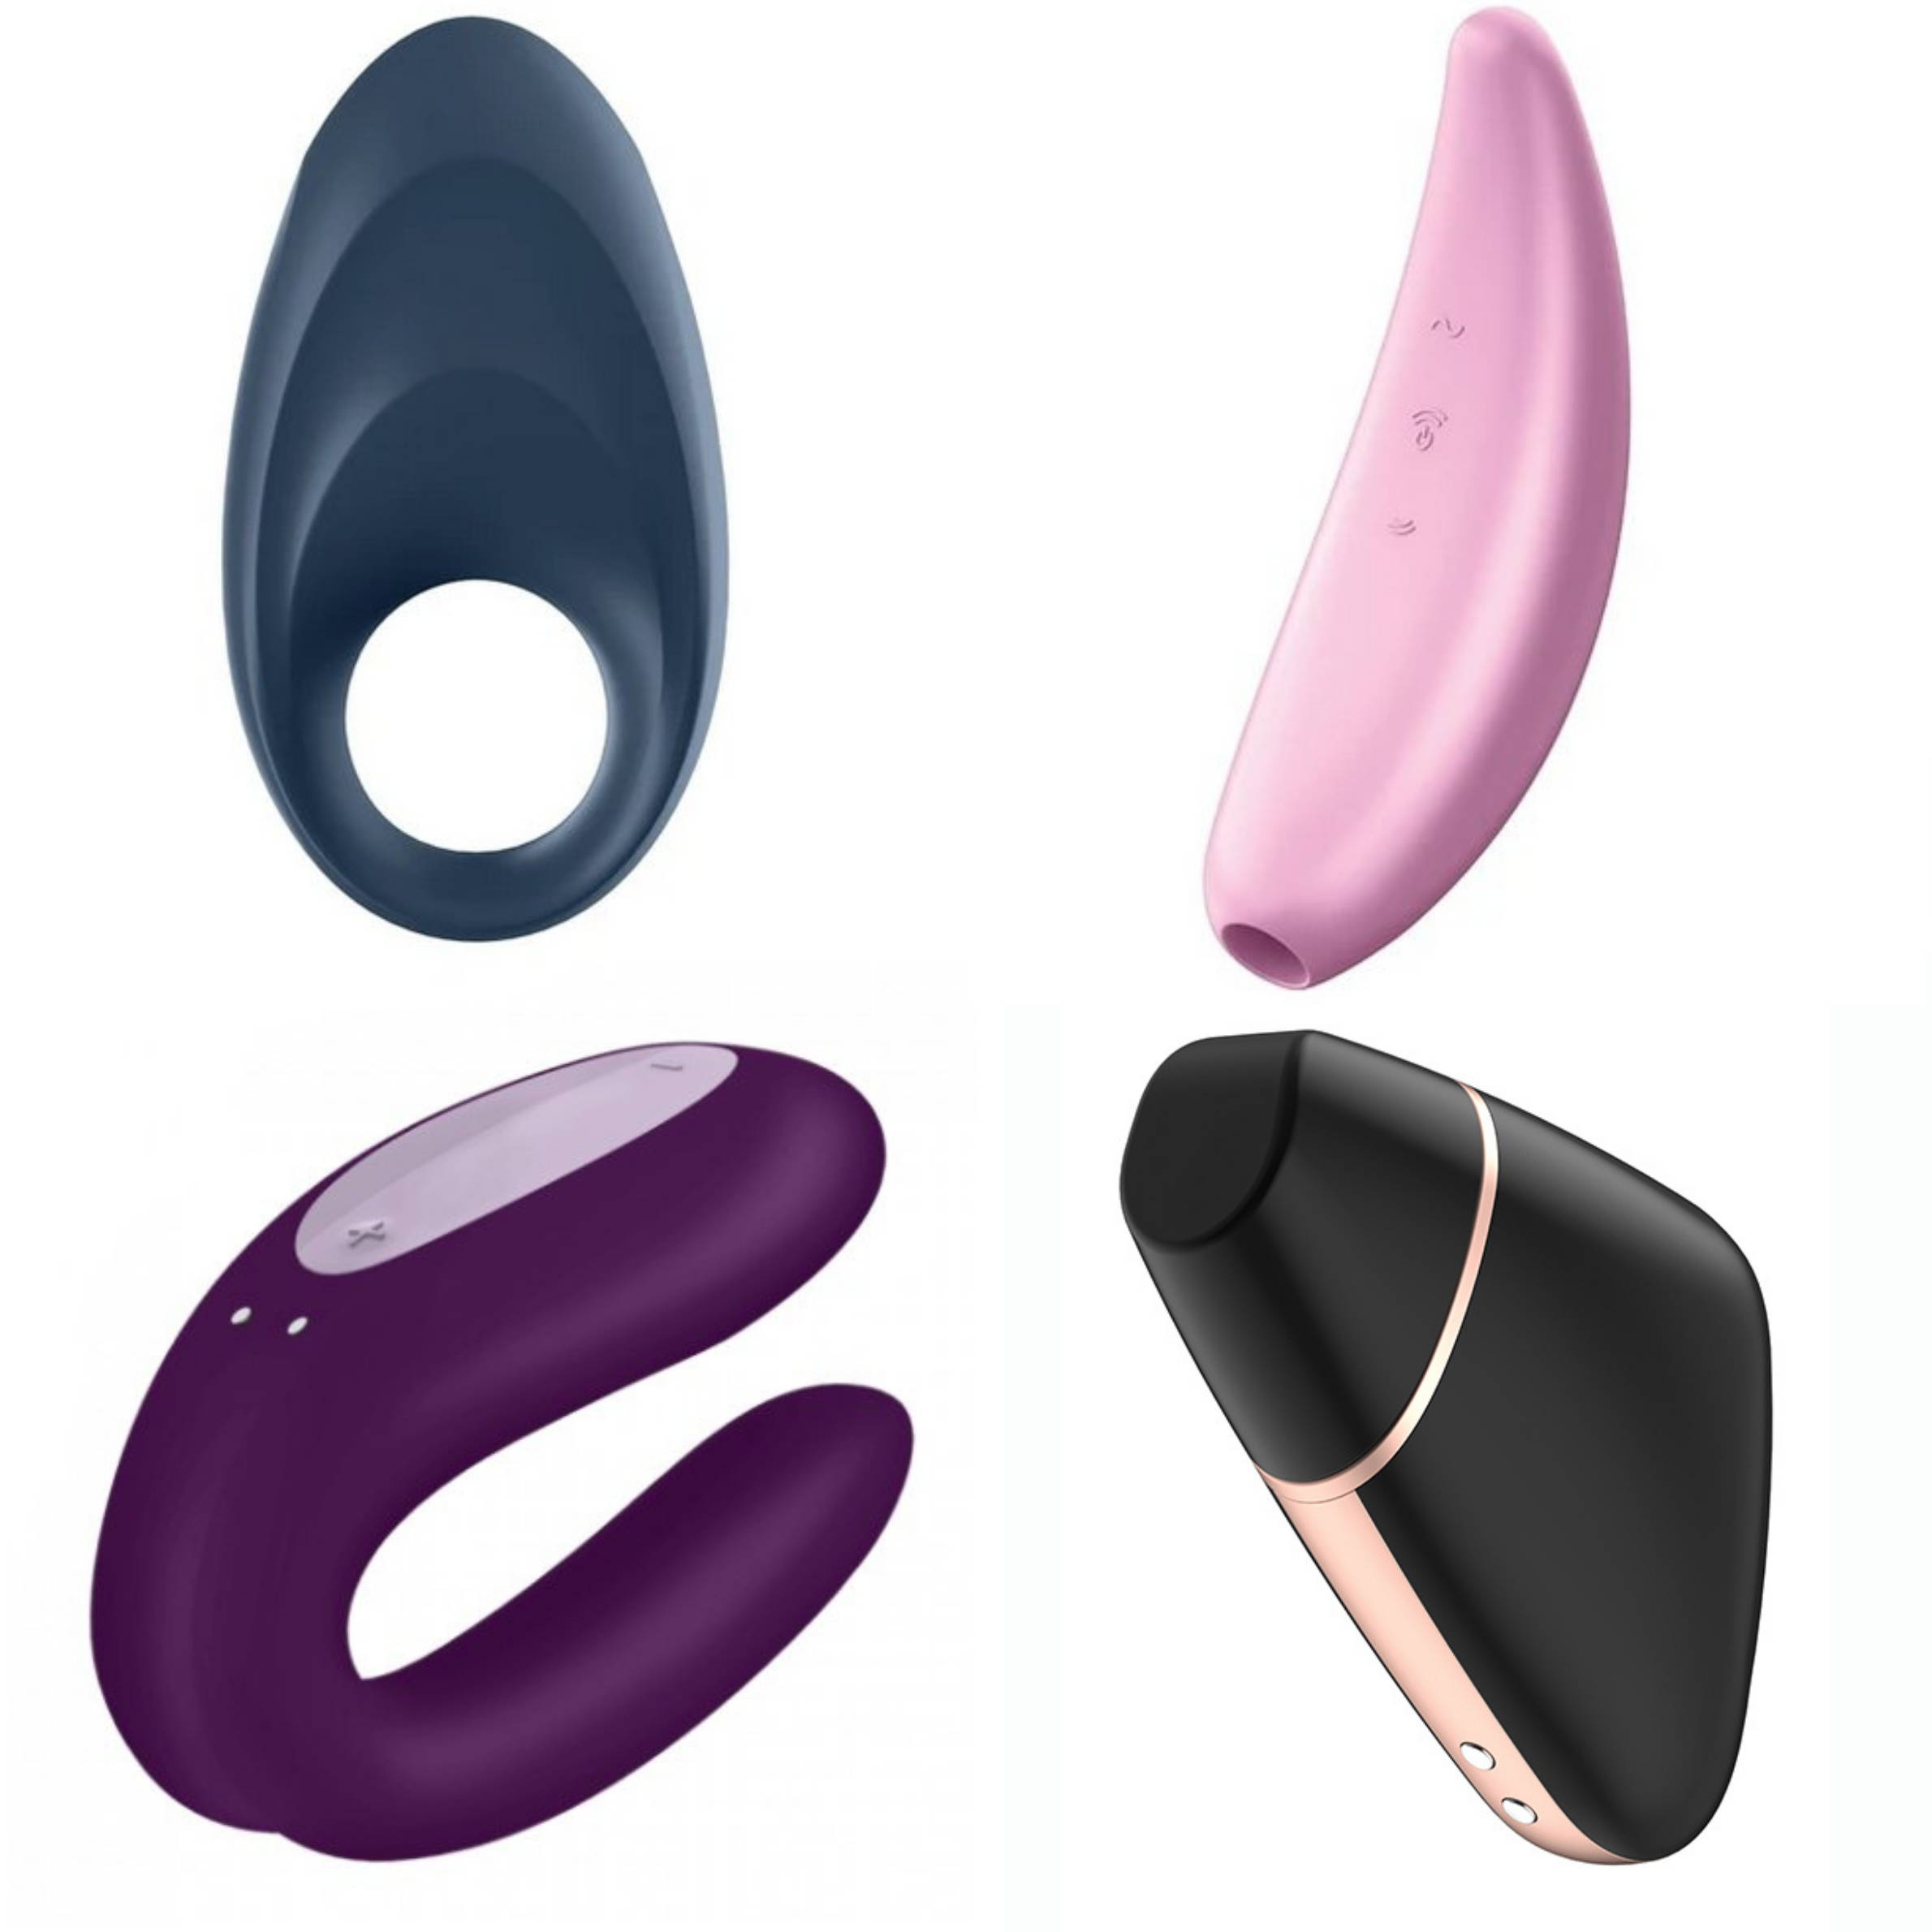 Picture of four of the Satisfyer toys